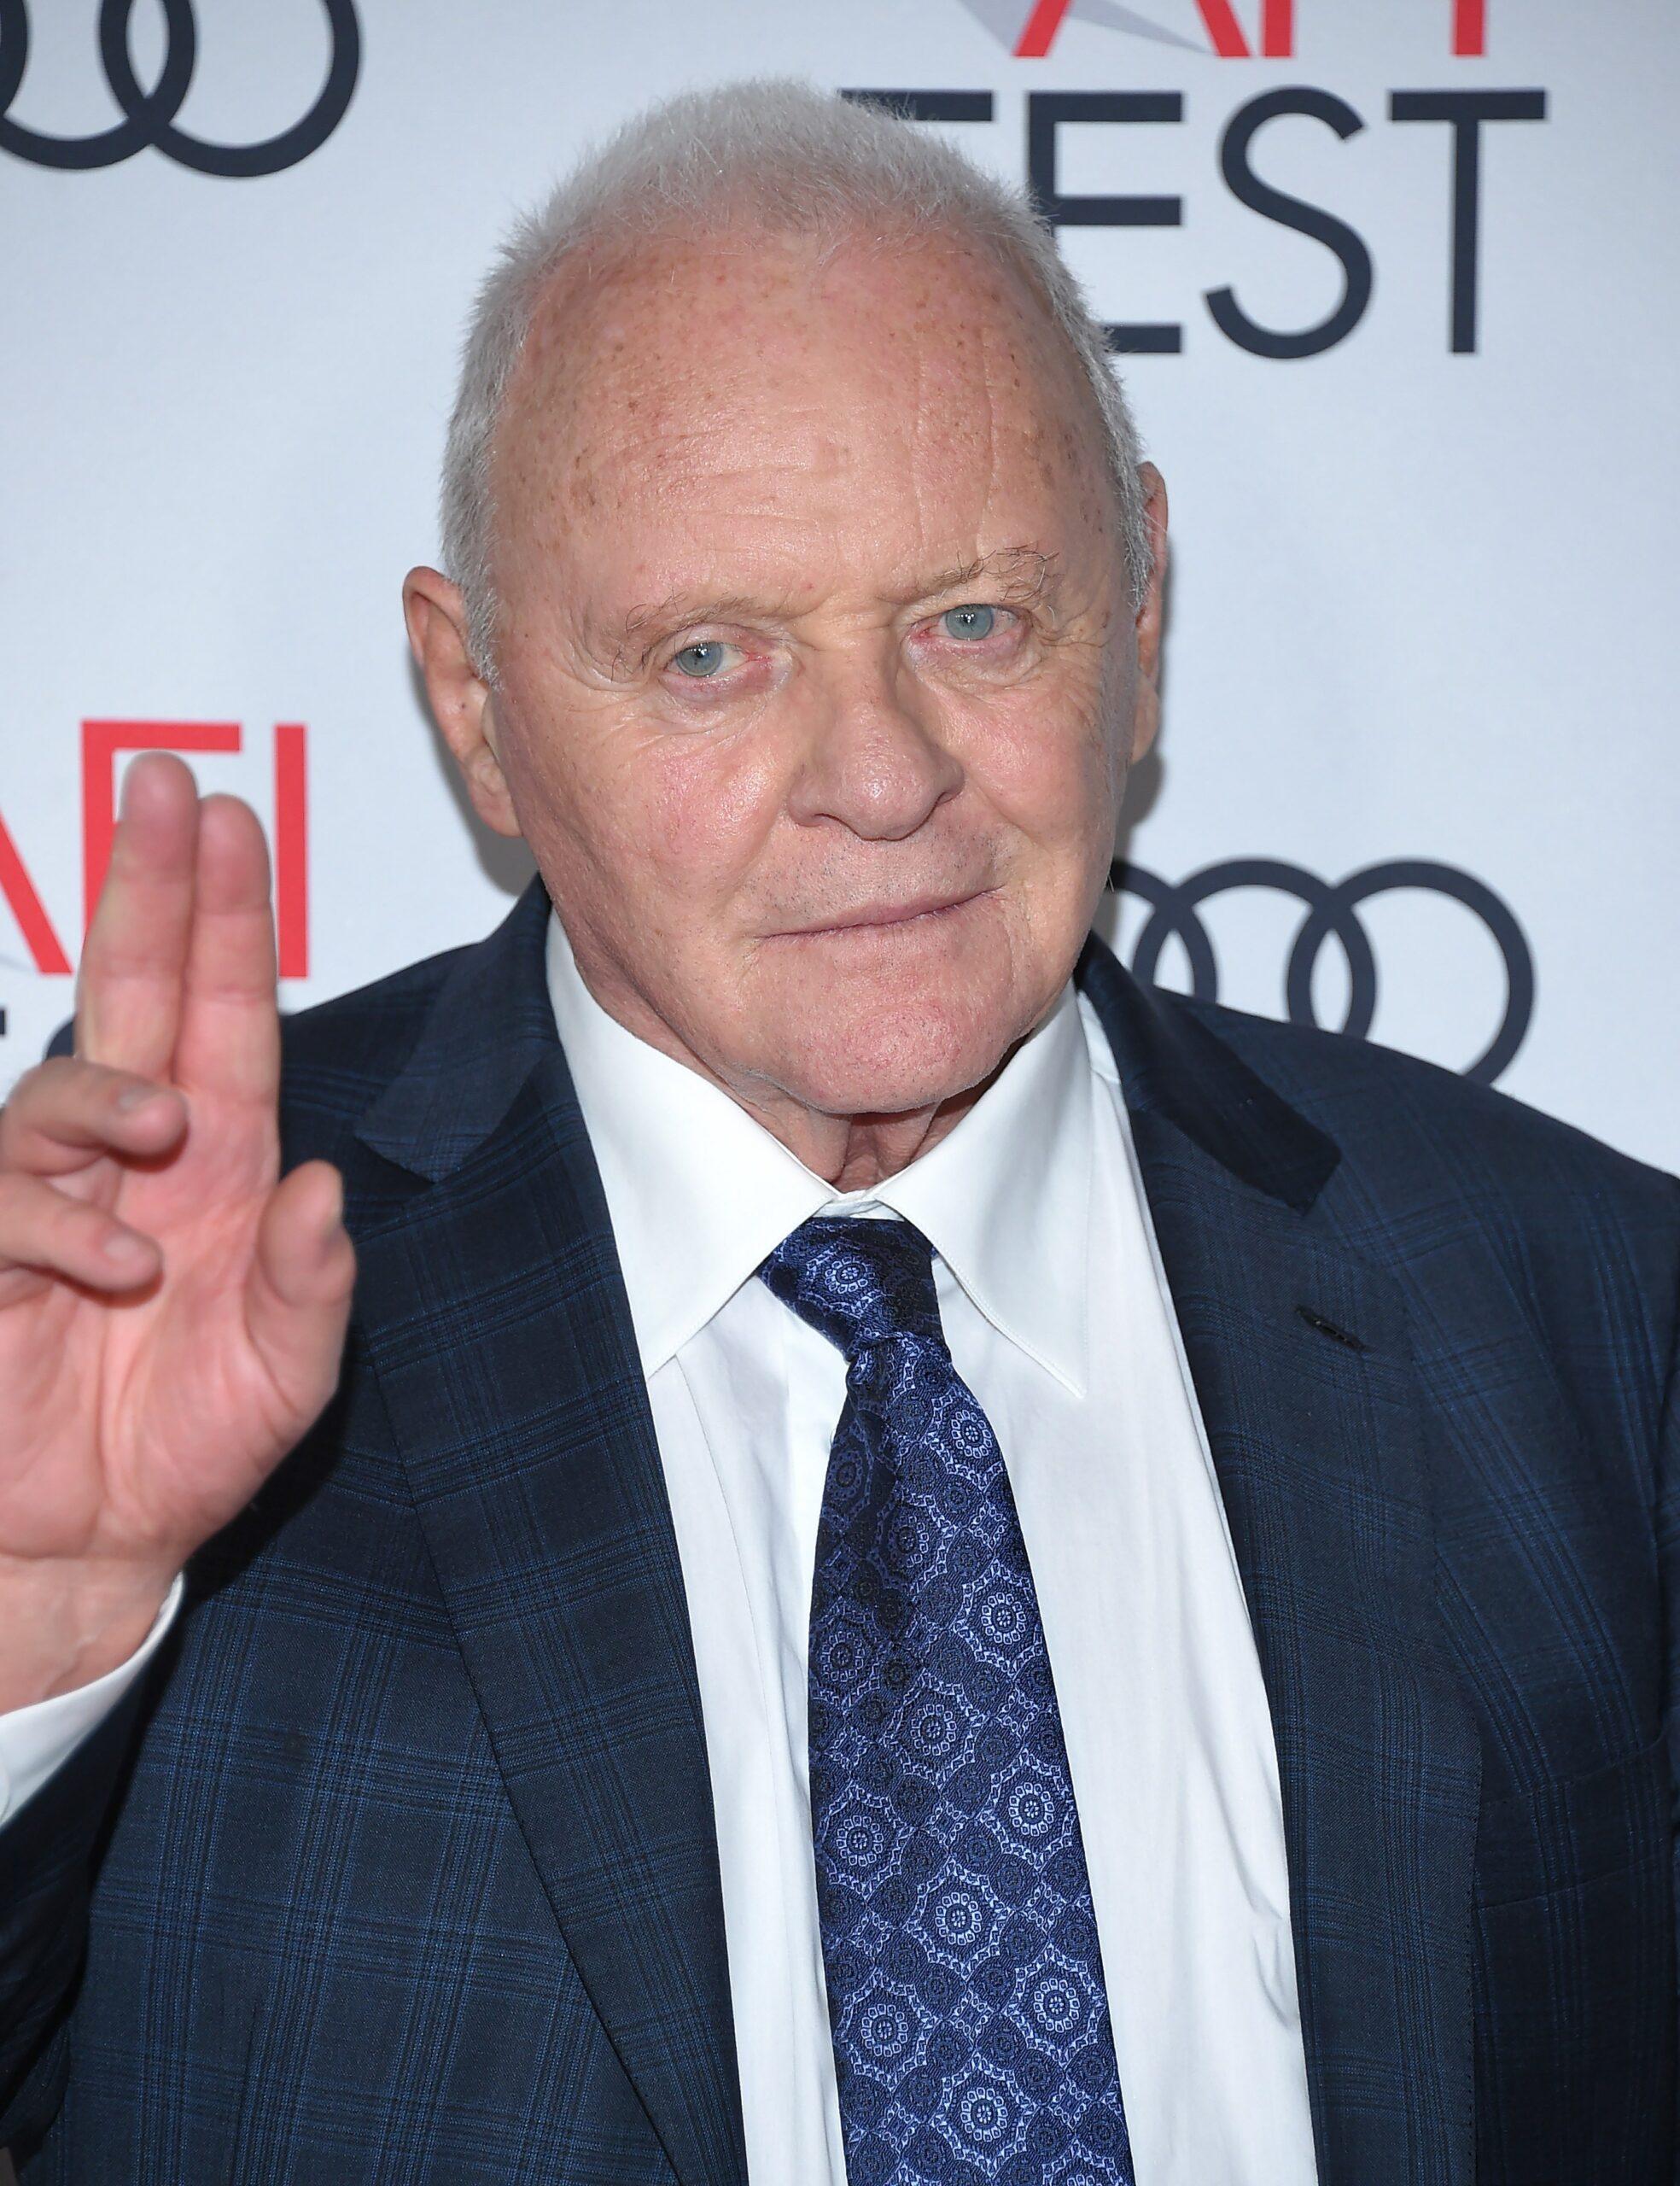 Anthony Hopkins Celebrates 47 Years of Sobriety In Motivational Video: 'Wishing Everyone A Healthy 2023'